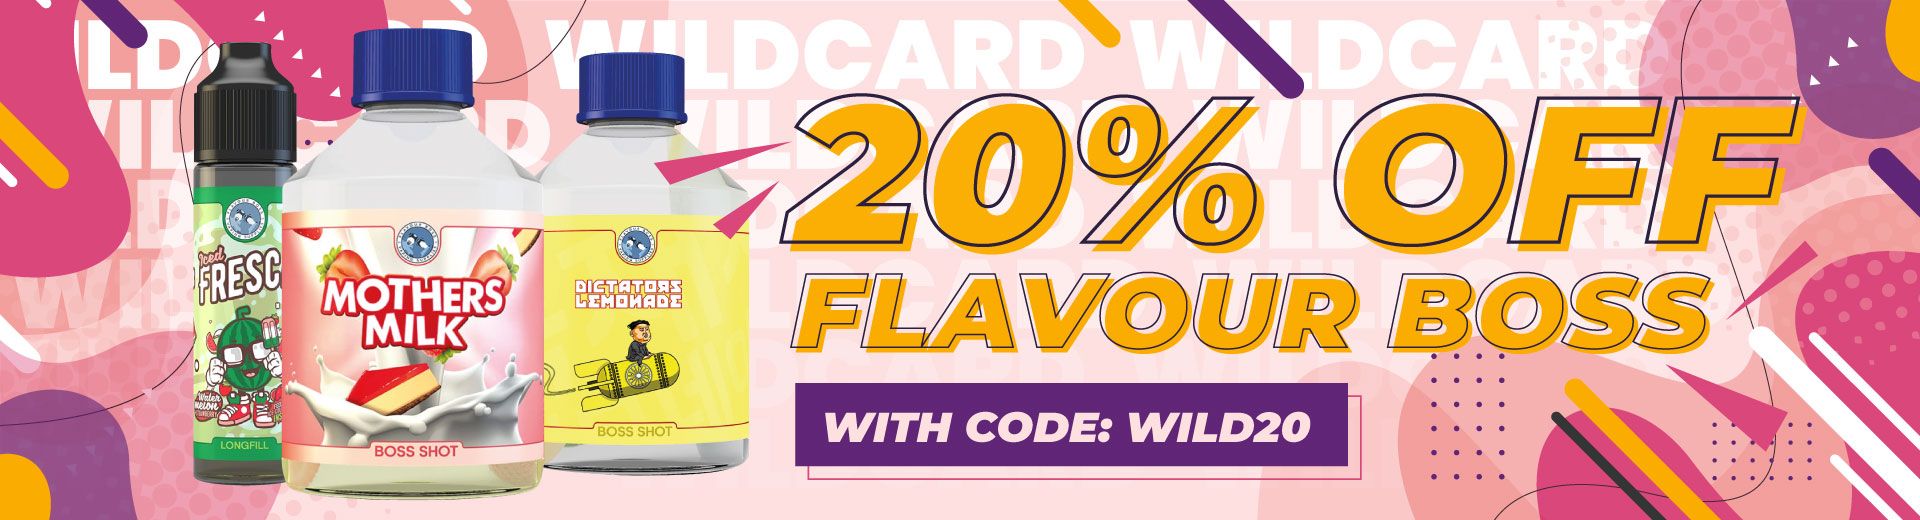 20% OFF FLAVOUR BOSS